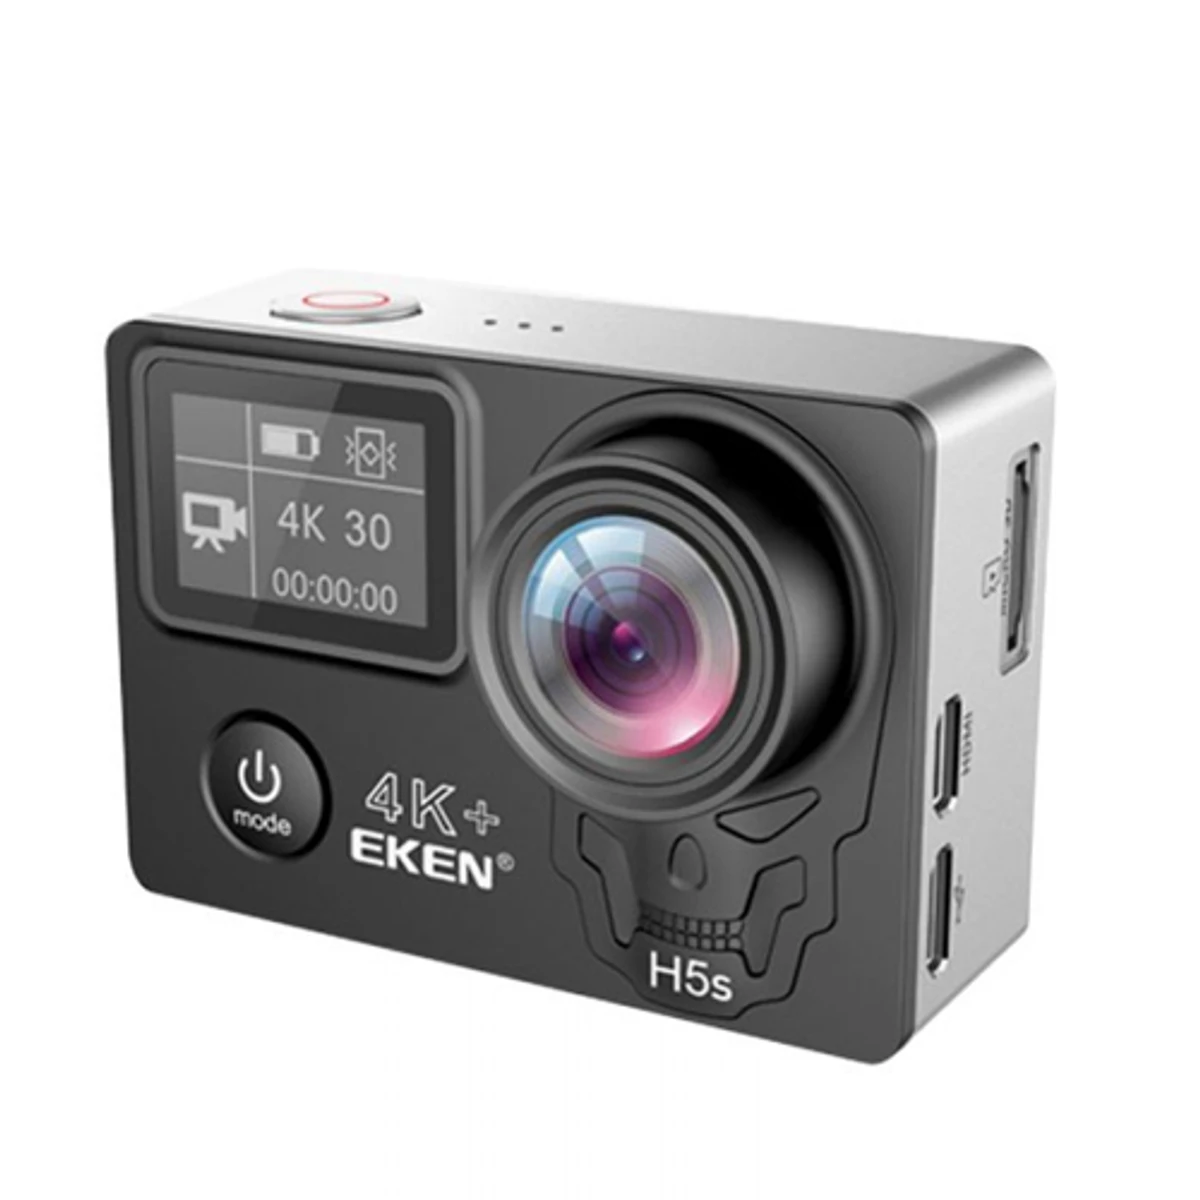 EKEN H5s Plus Ultra HD Action Camera 4K+ 12MP With Touch Screen